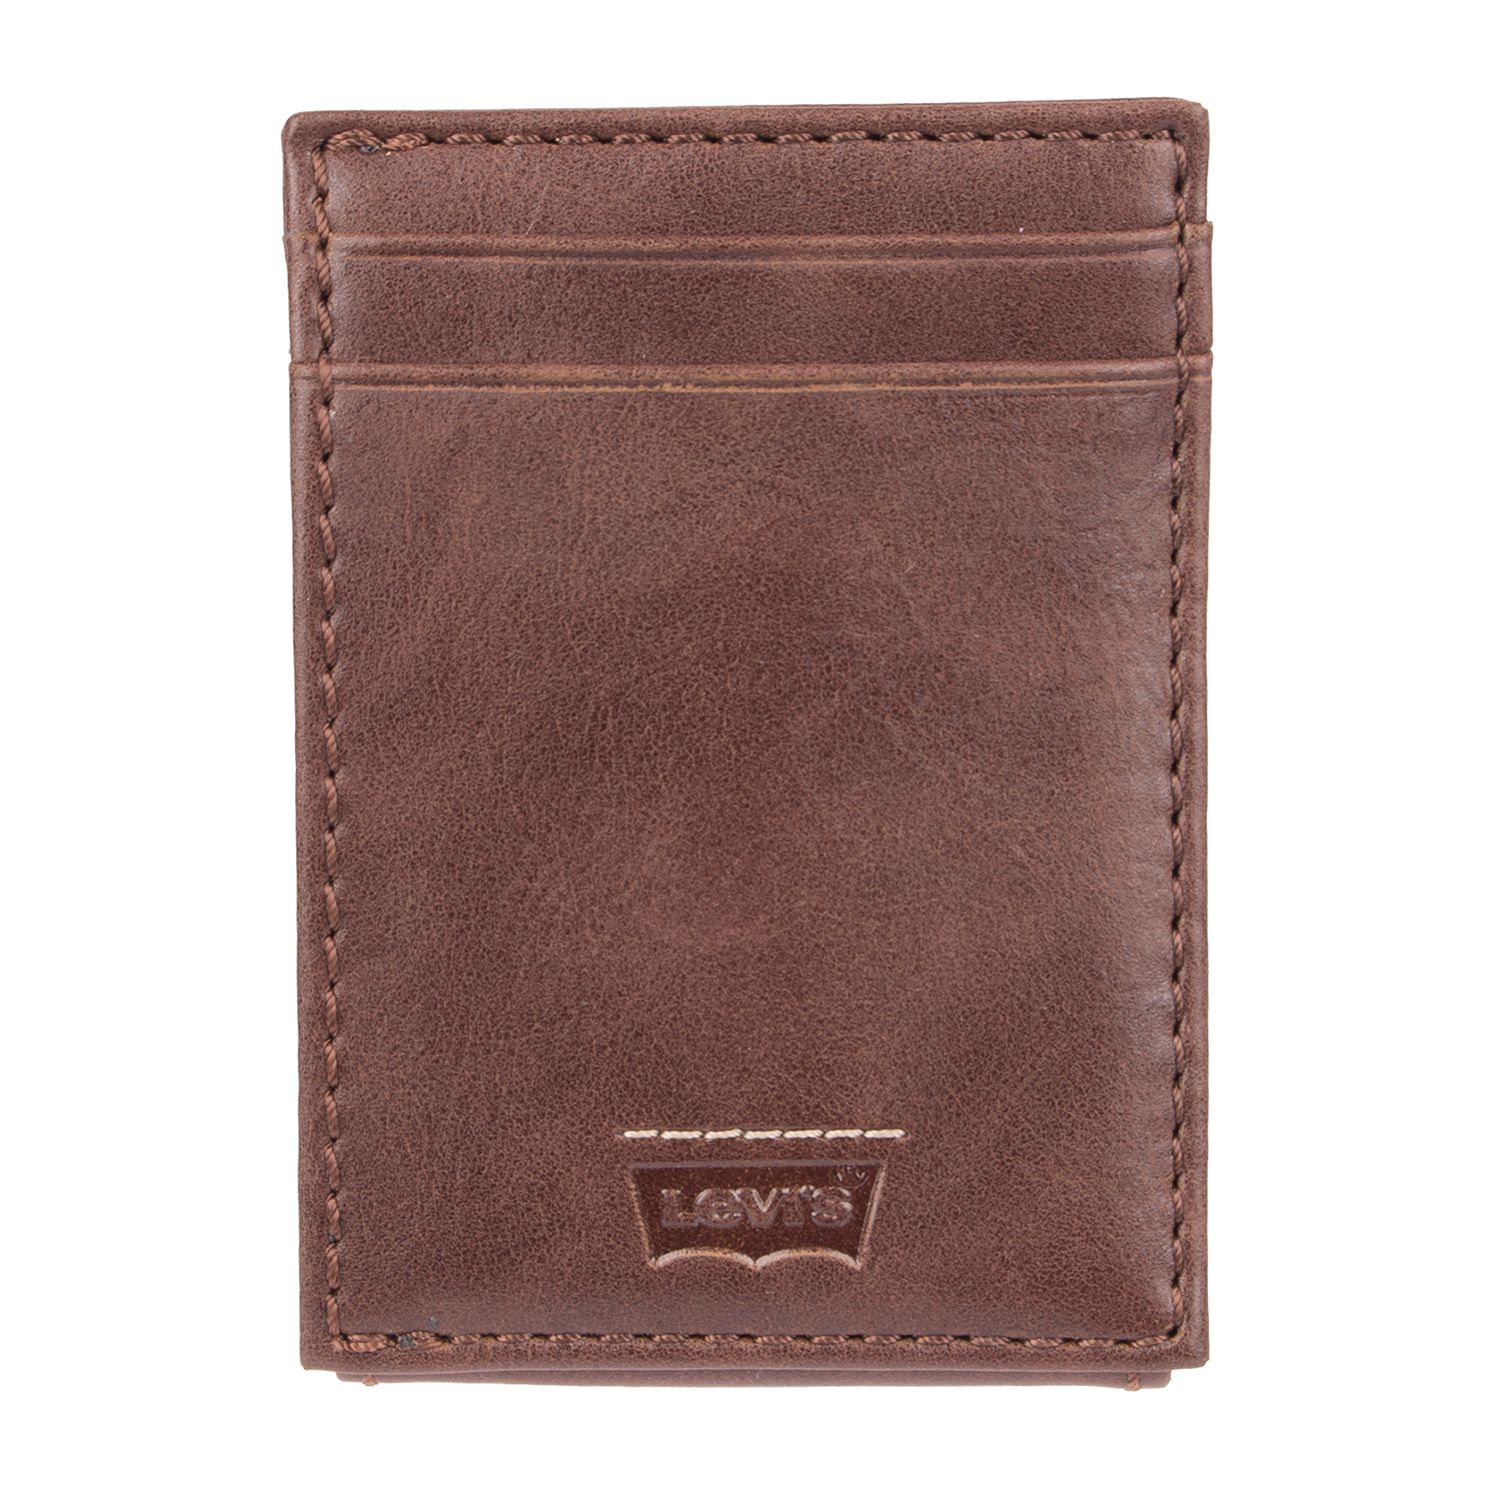 levi's leather wallet price